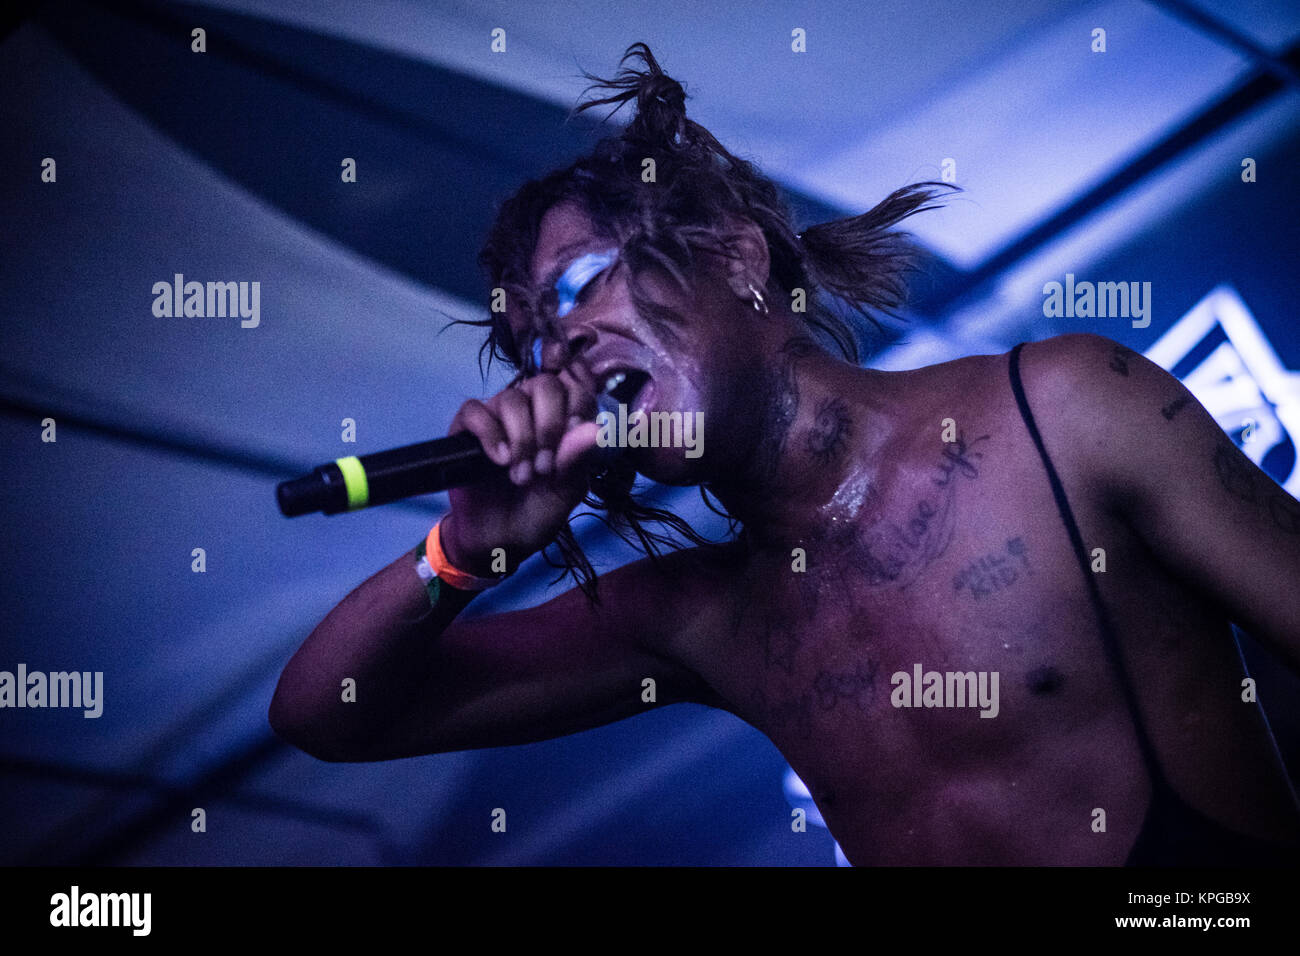 The American queer rapper and performance artist Michael Quattlebaum Jr is better known by his stage name Mykki Blanco and here performs a live concert at the Danish block party and street festival Distortion 2014. Denmark, 08/06 2014. Stock Photo